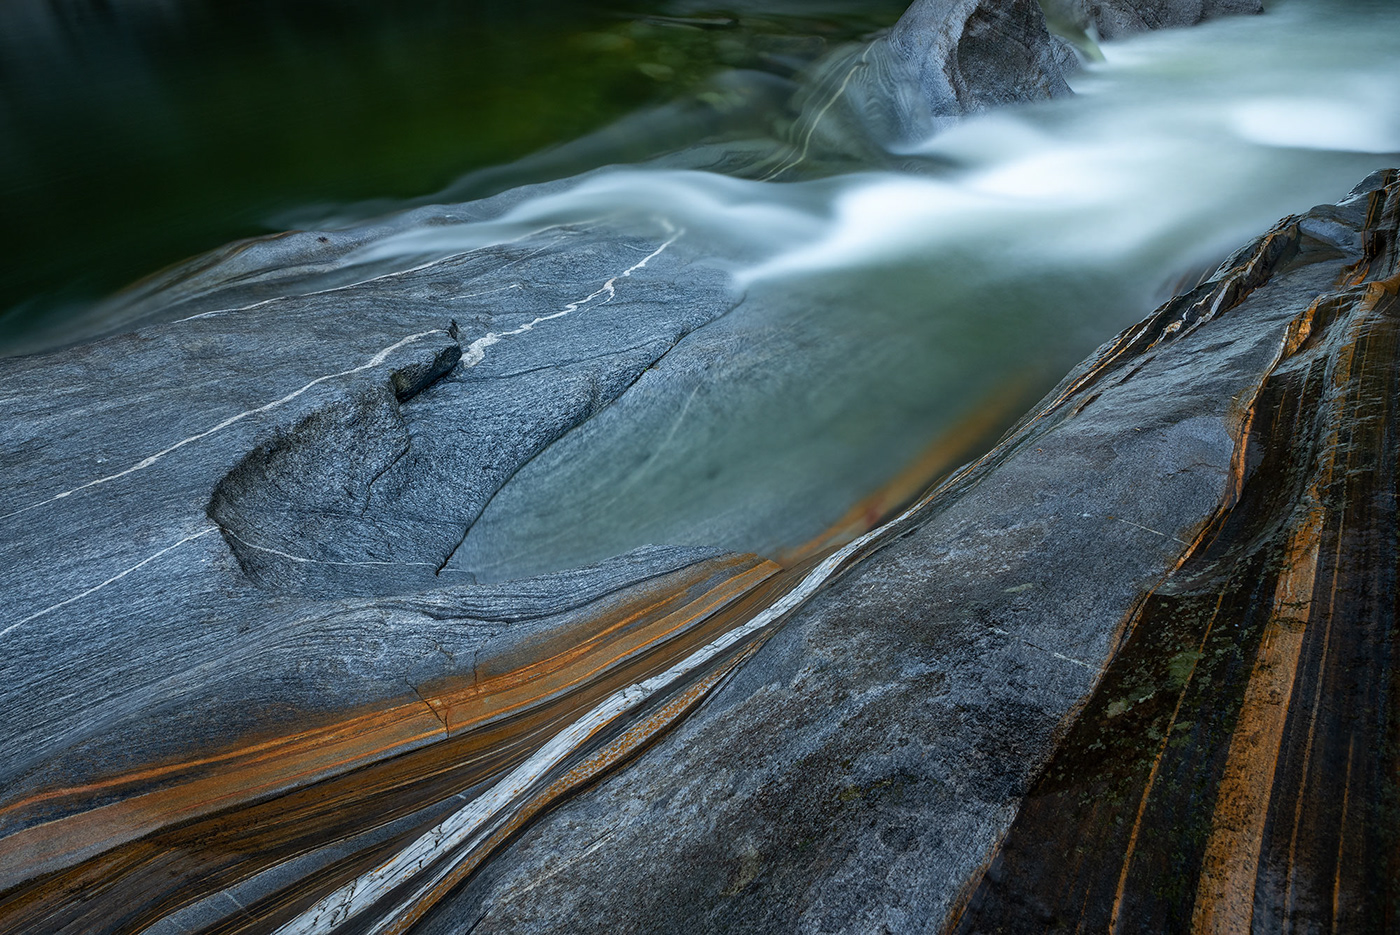 Long exposure photography of the Verzasca river by Jennifer Esseiva.